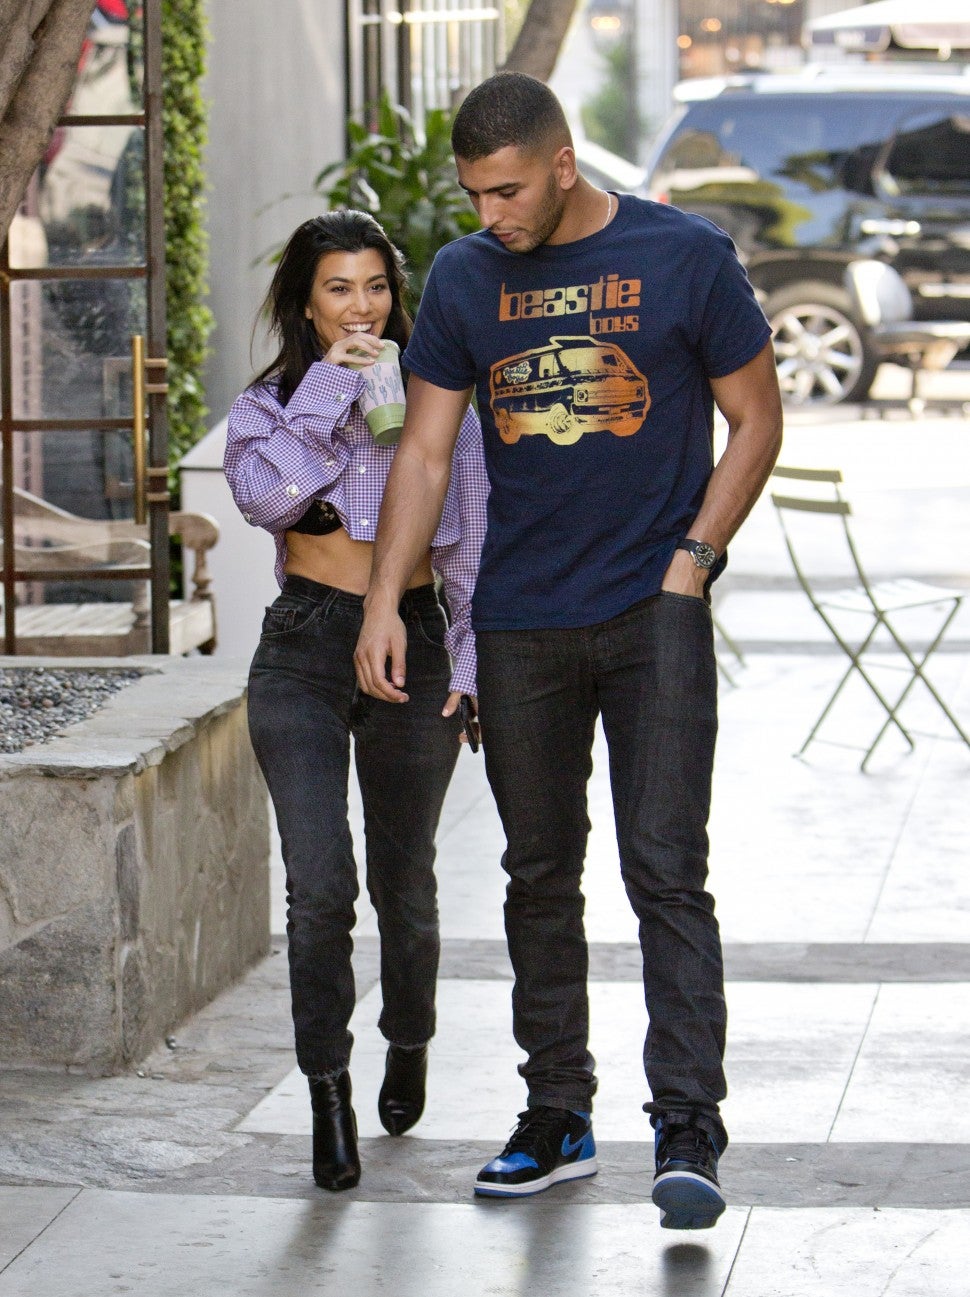 Kourtney Kardashian Shows Off Her Toned Abs On Date With Younes Bendjima Pic Entertainment